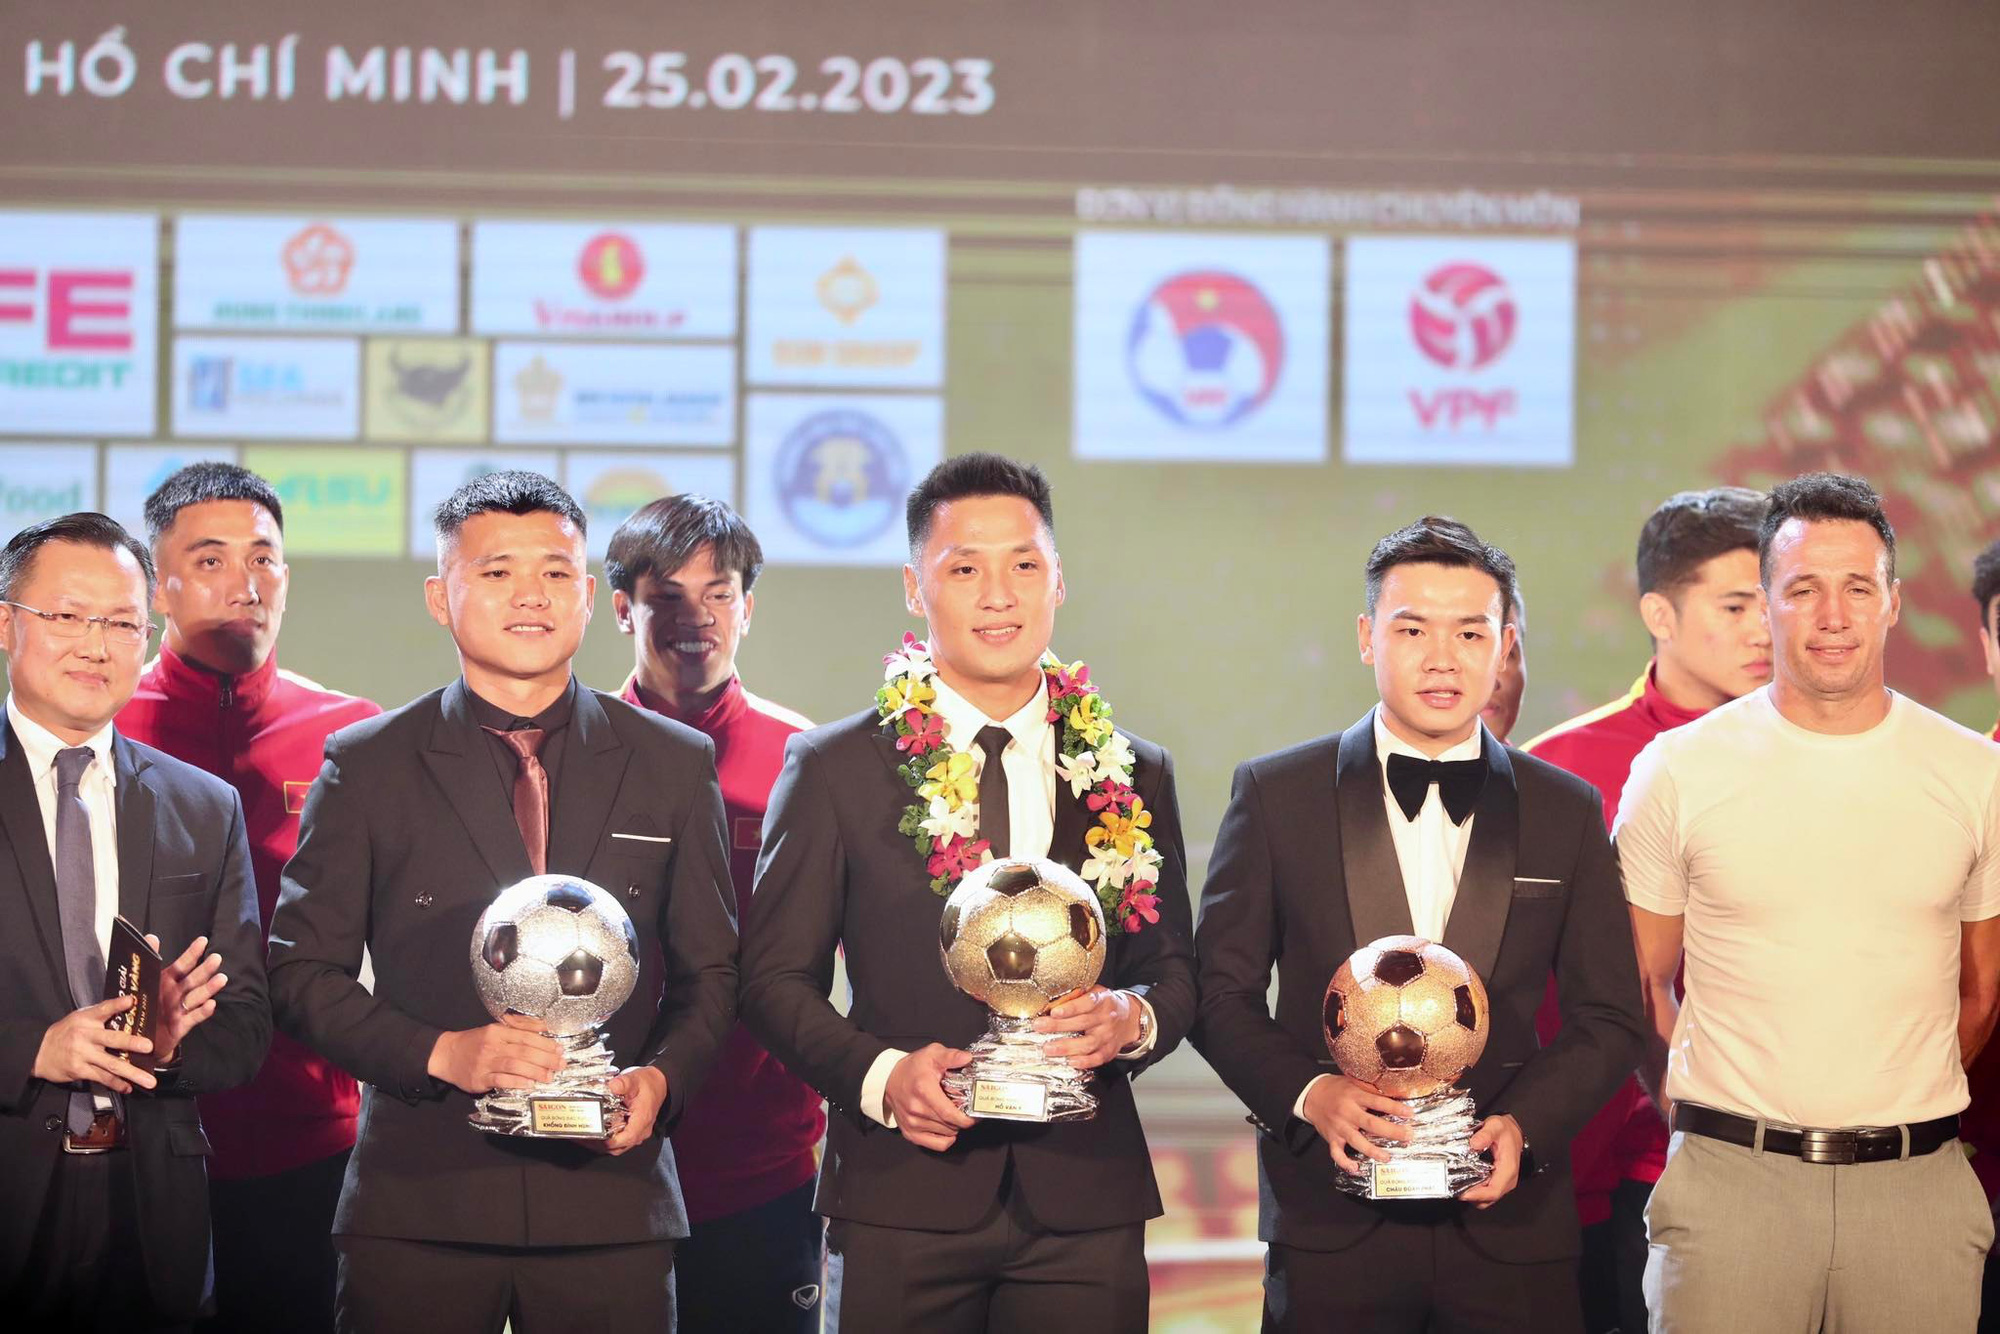 Ho Van Y (C), Khong Dinh Hung (L), and Chau Doan Phat (R) receive the futsal Golden, Silver, and Bronze Ball, February 25, 2023. Photo: Nguyen Khoi / Tuoi Tre